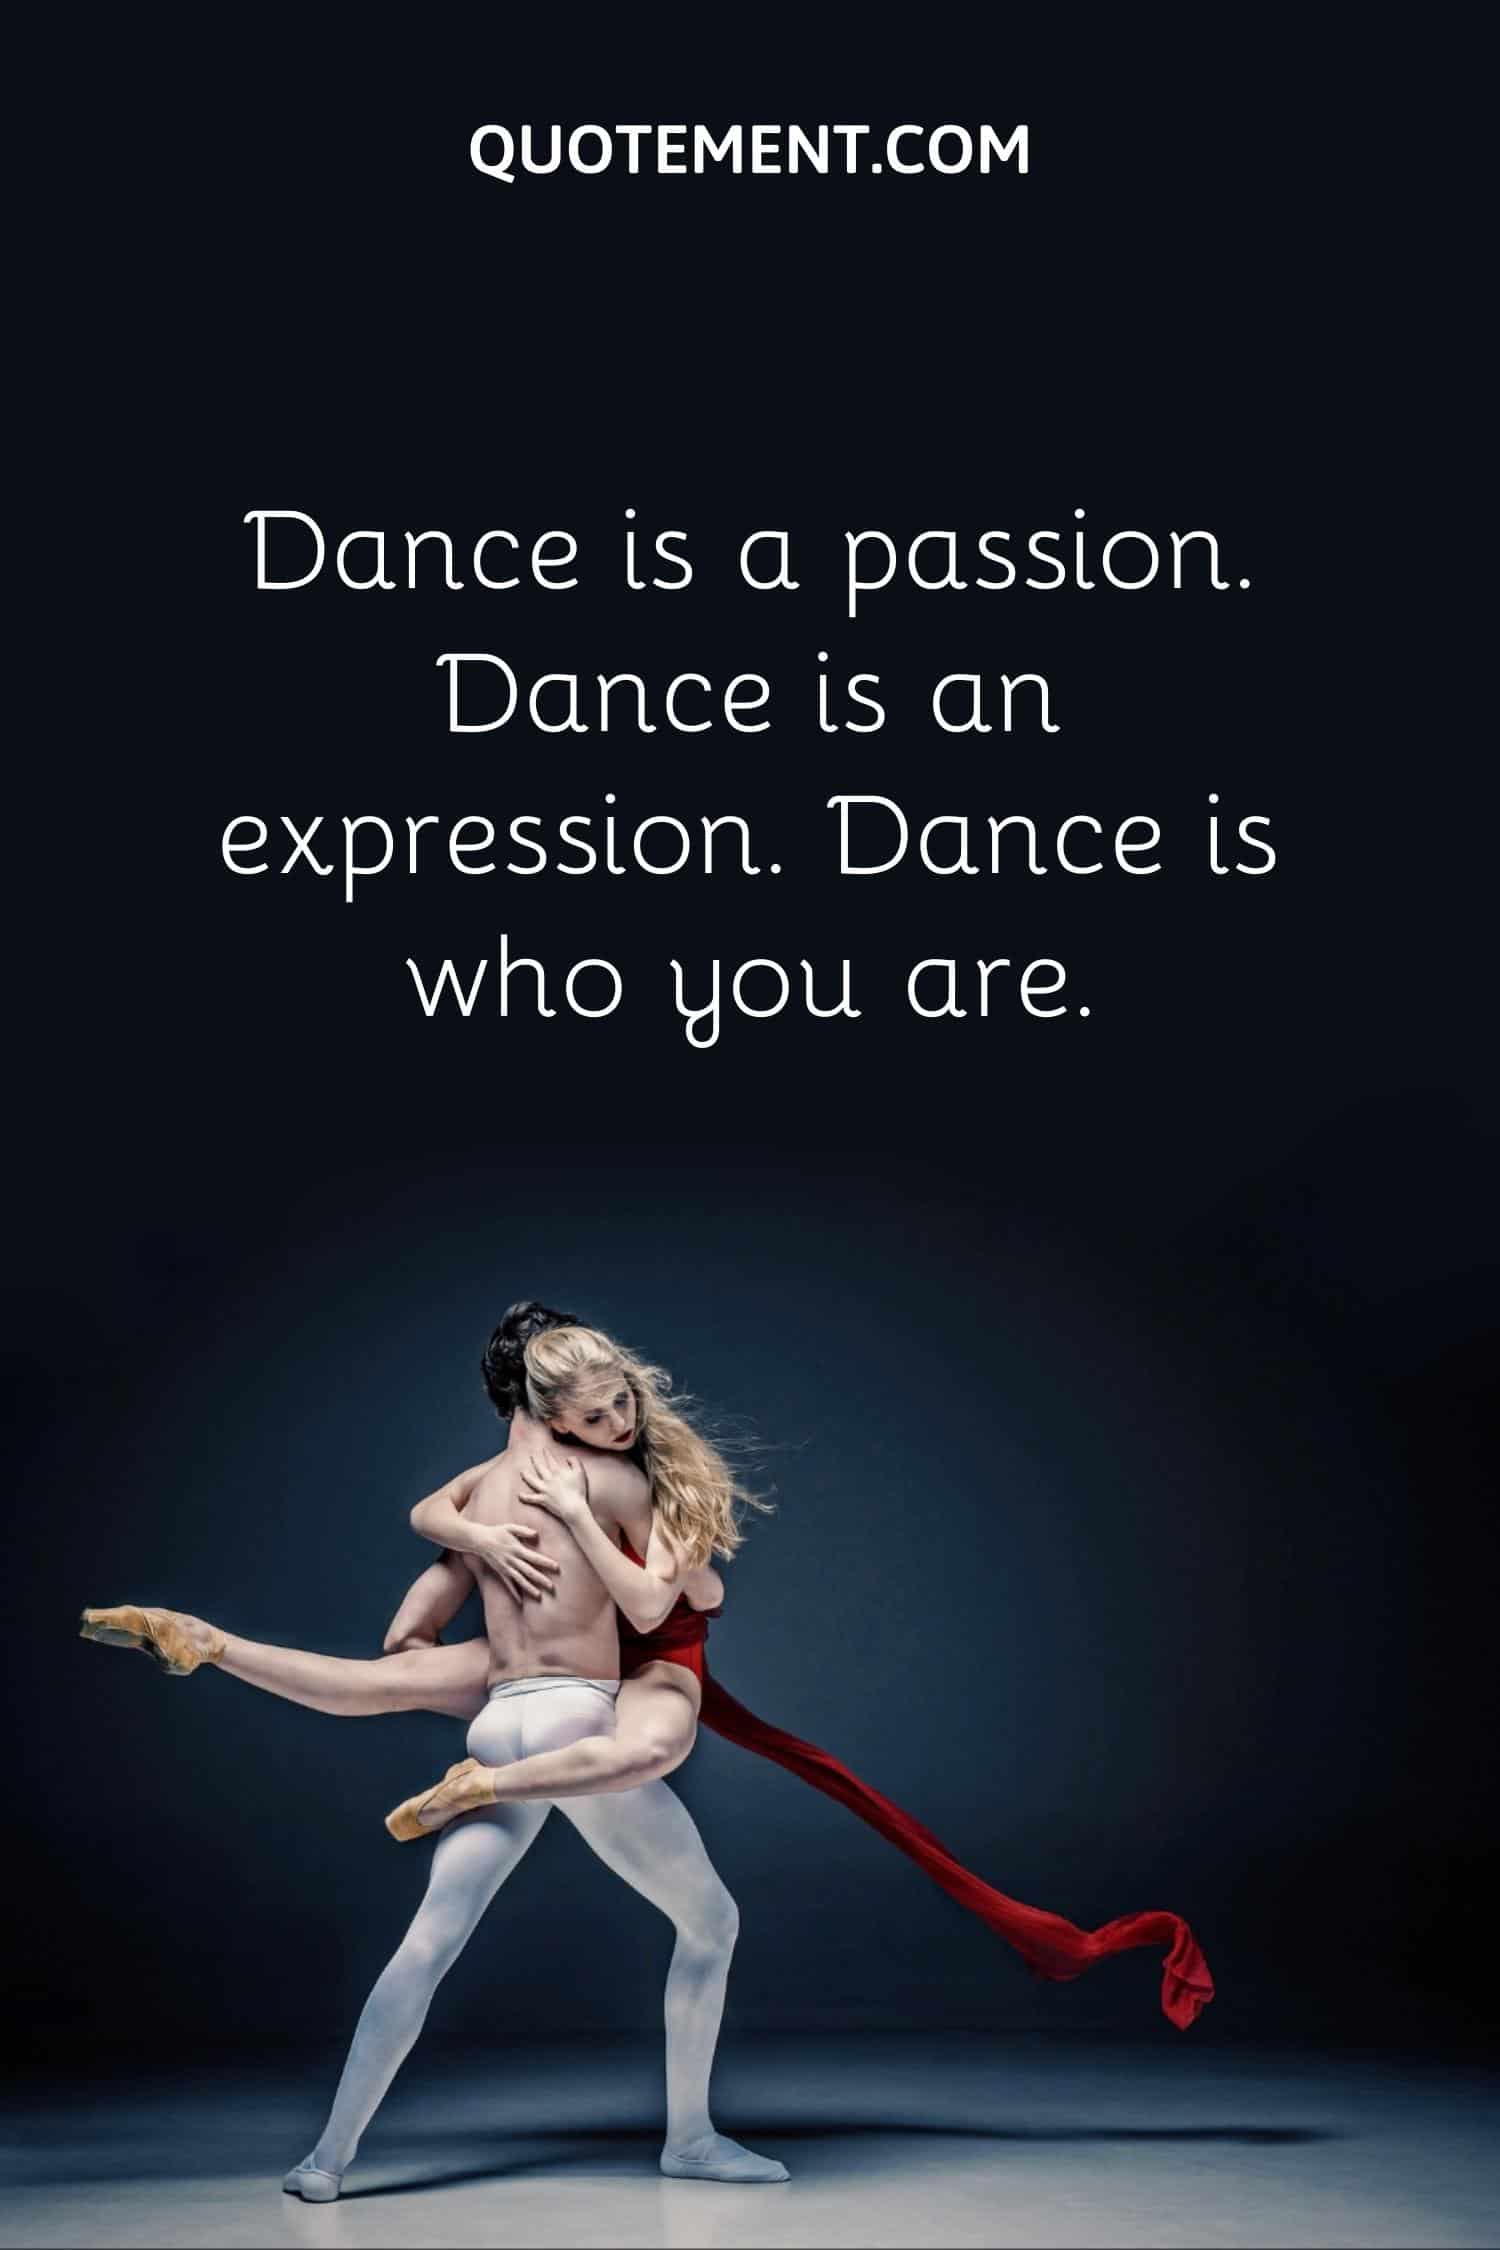 Dance is a passion